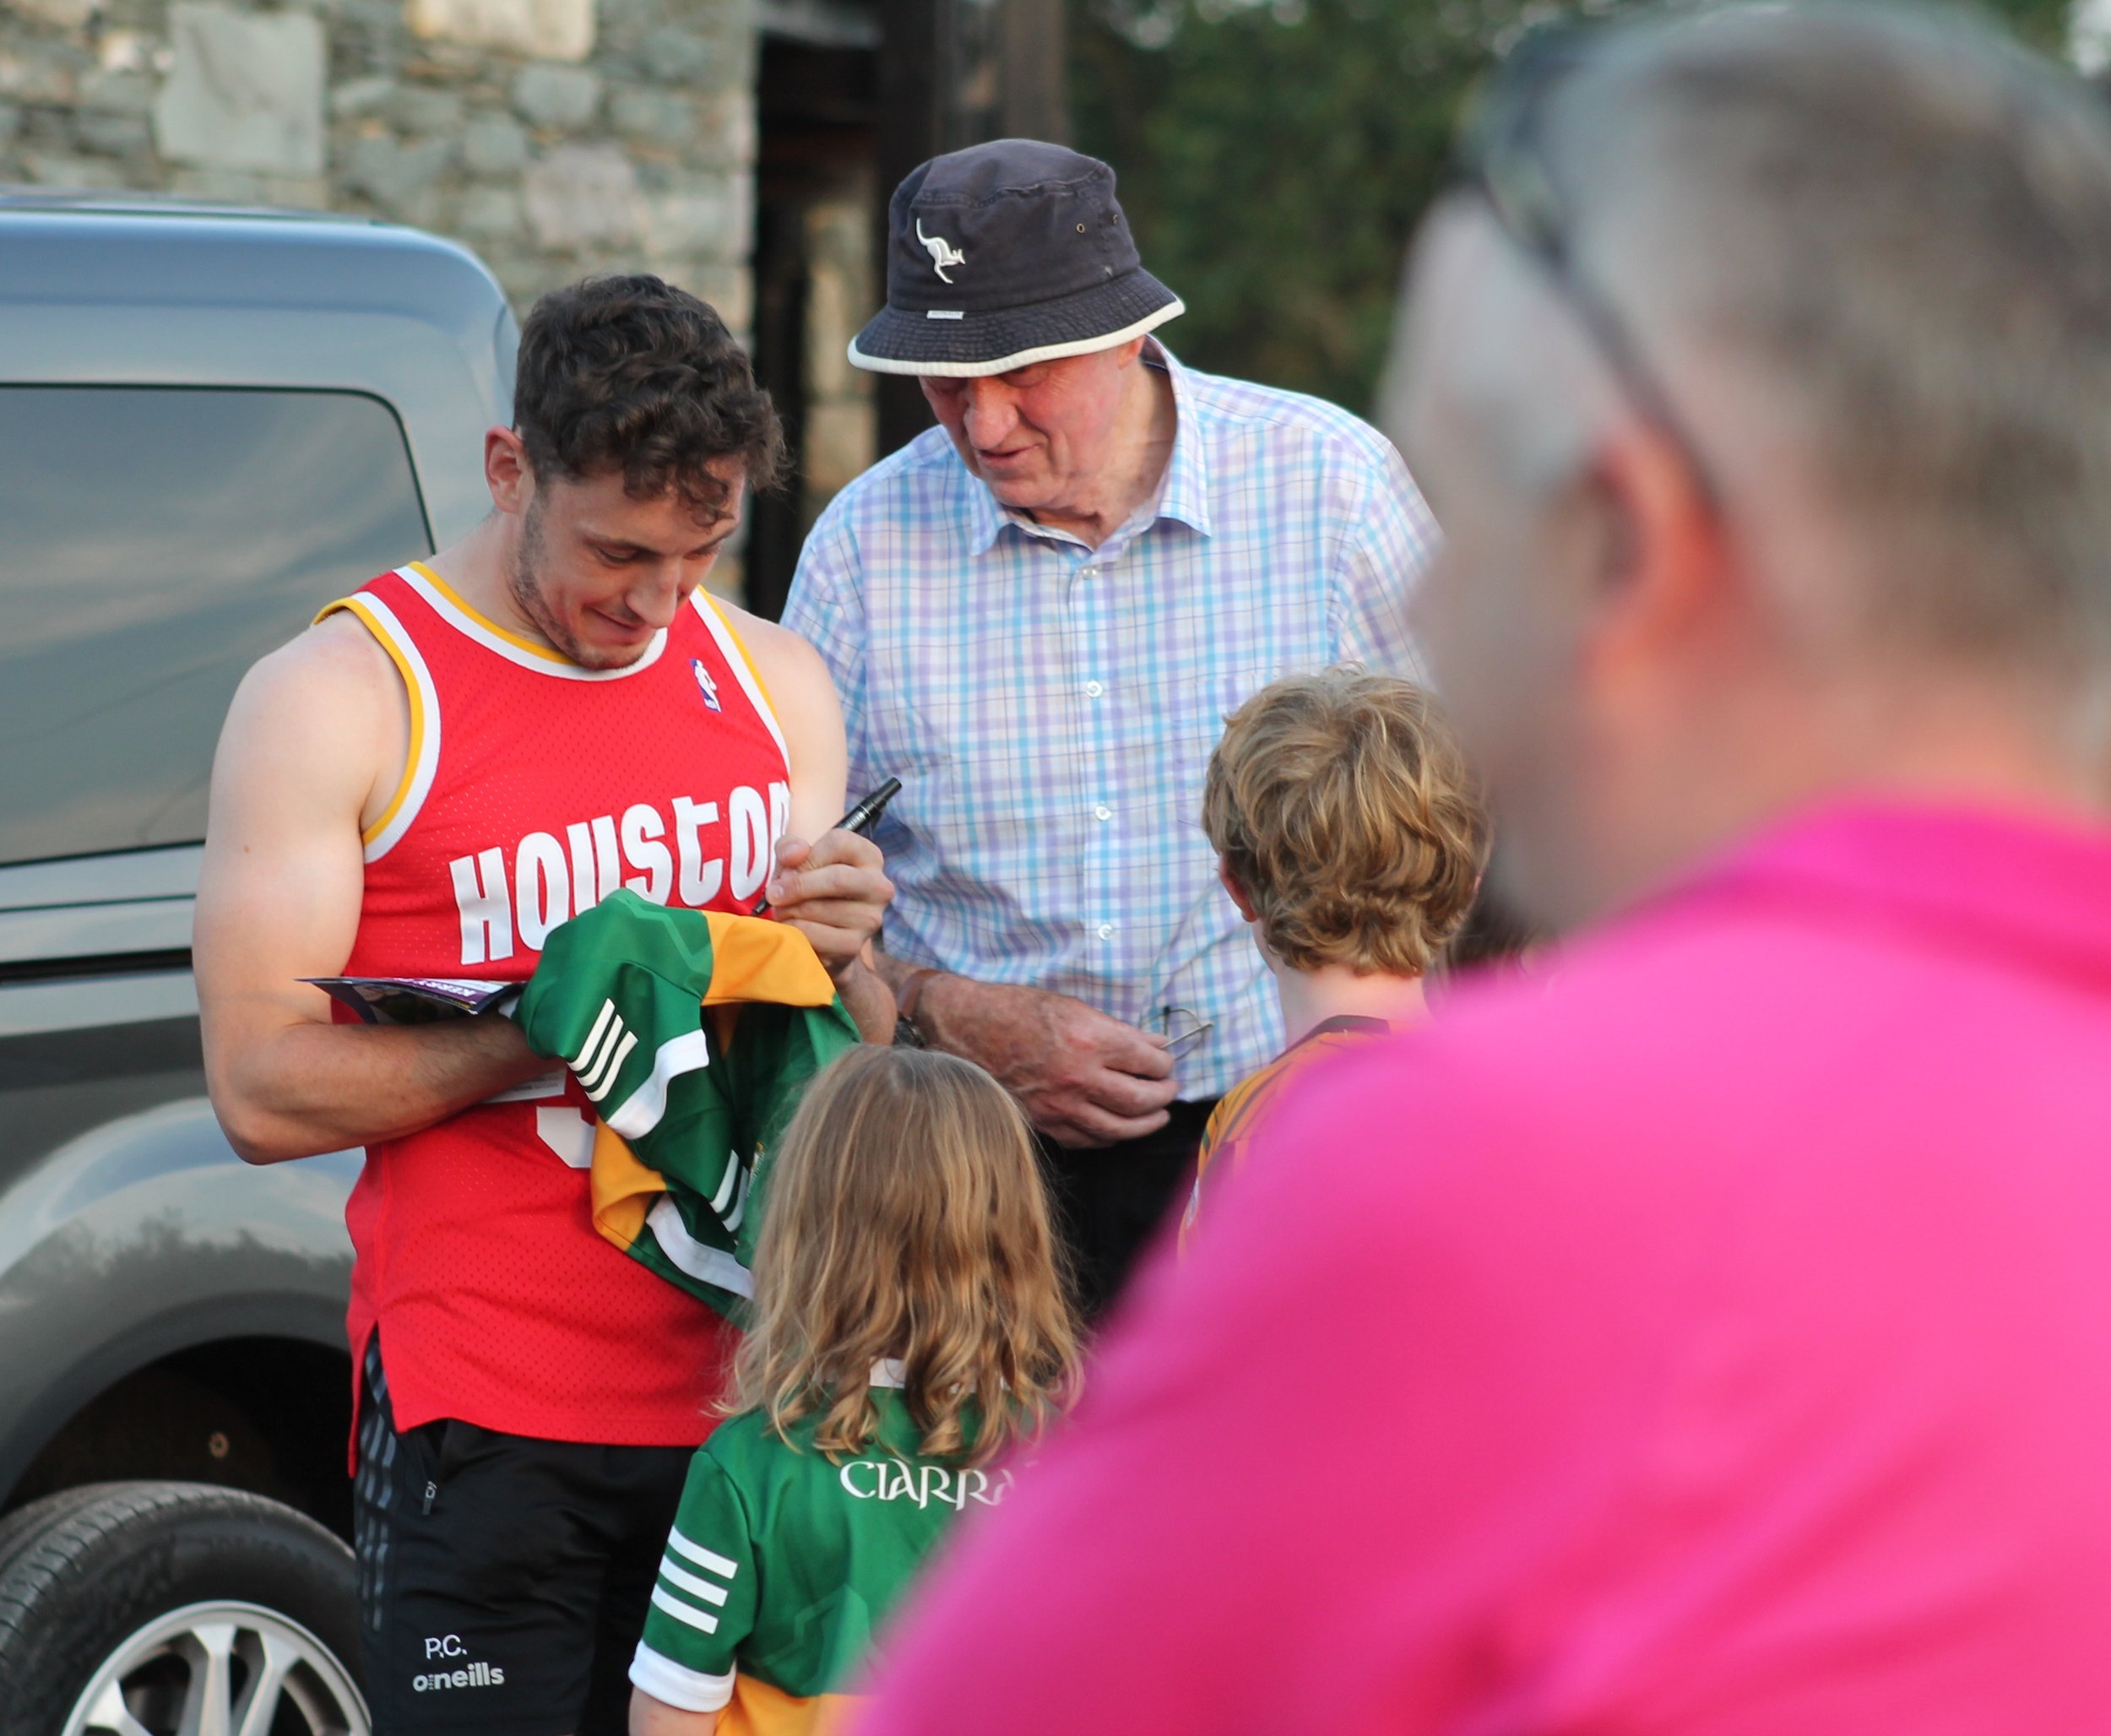 paudie clifford signing jersey.JPG